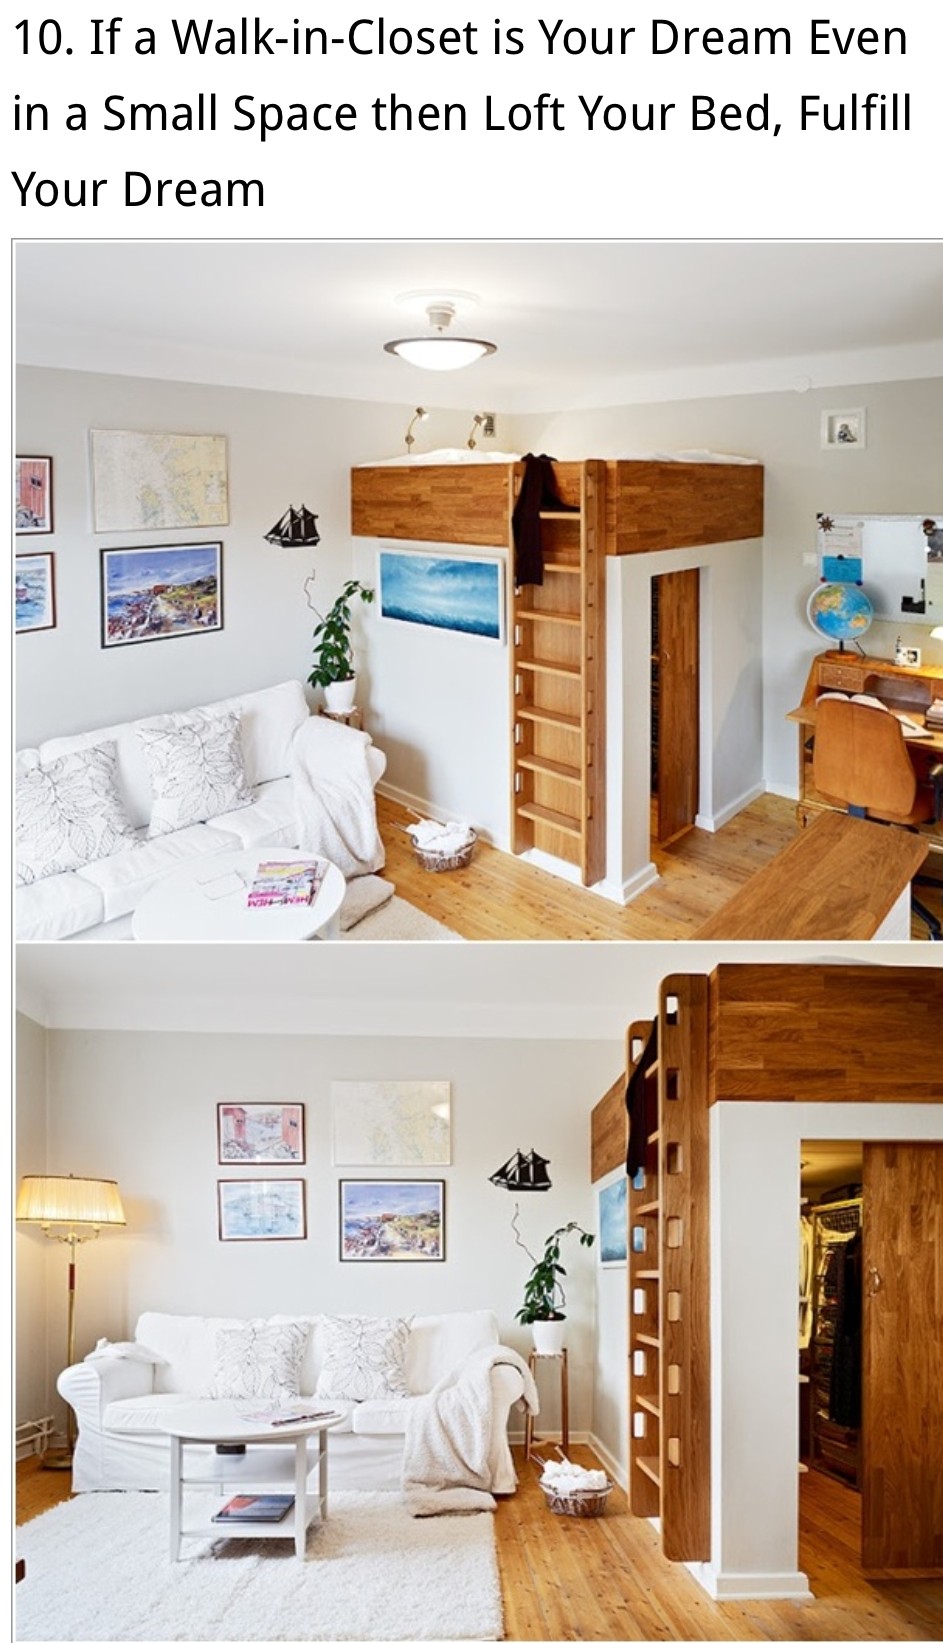 full size loft bed with storage underneath